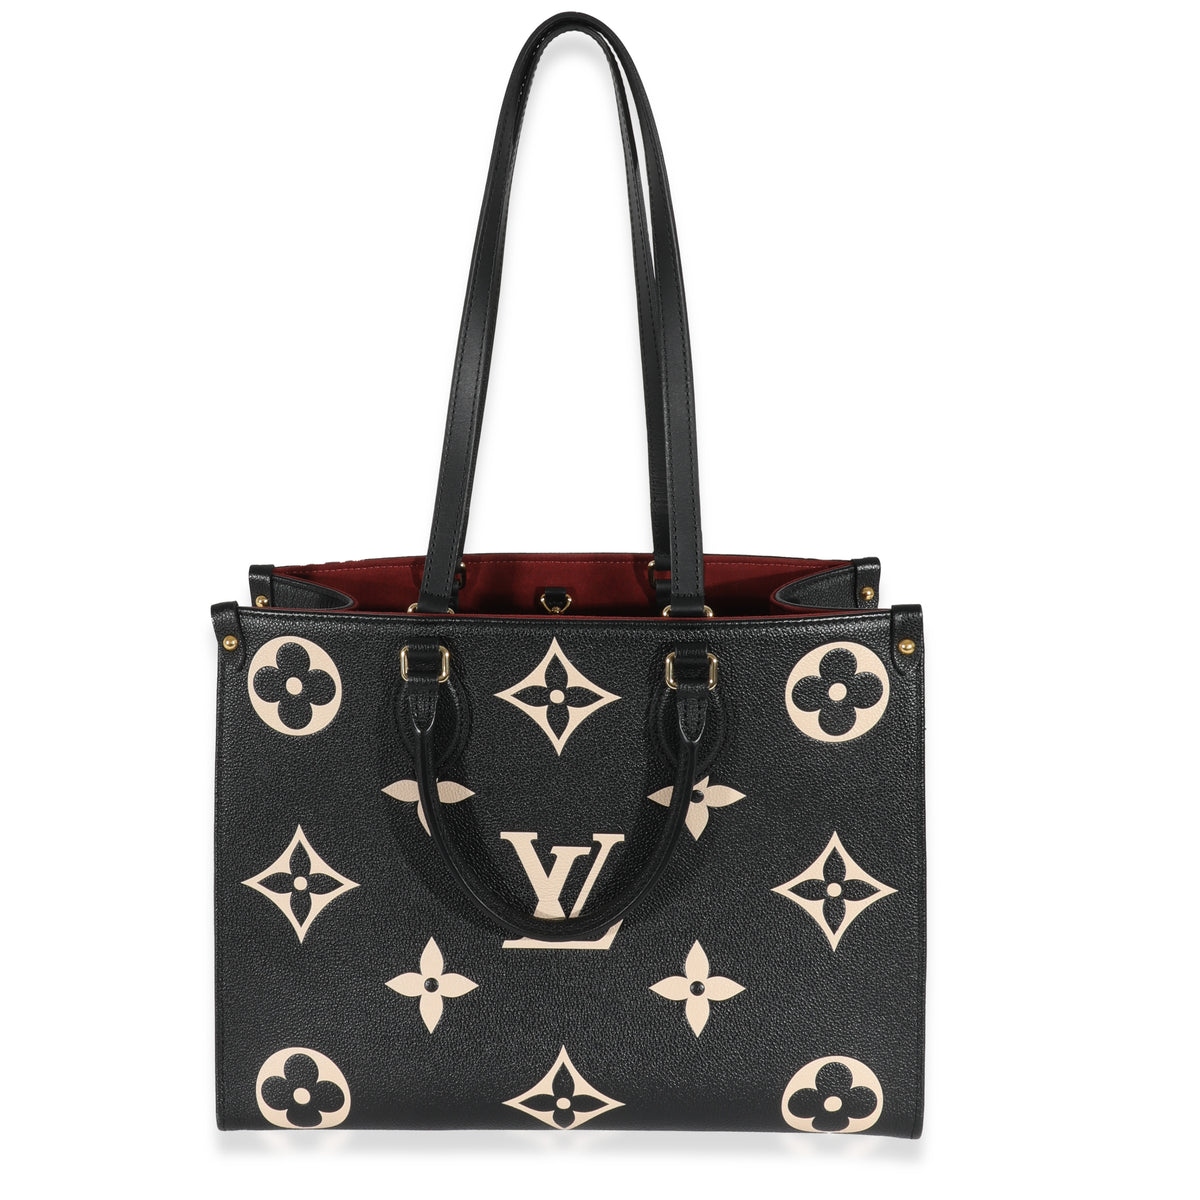 Louis Vuitton - Authenticated Onthego Handbag - Cloth Black for Women, Never Worn, with Tag